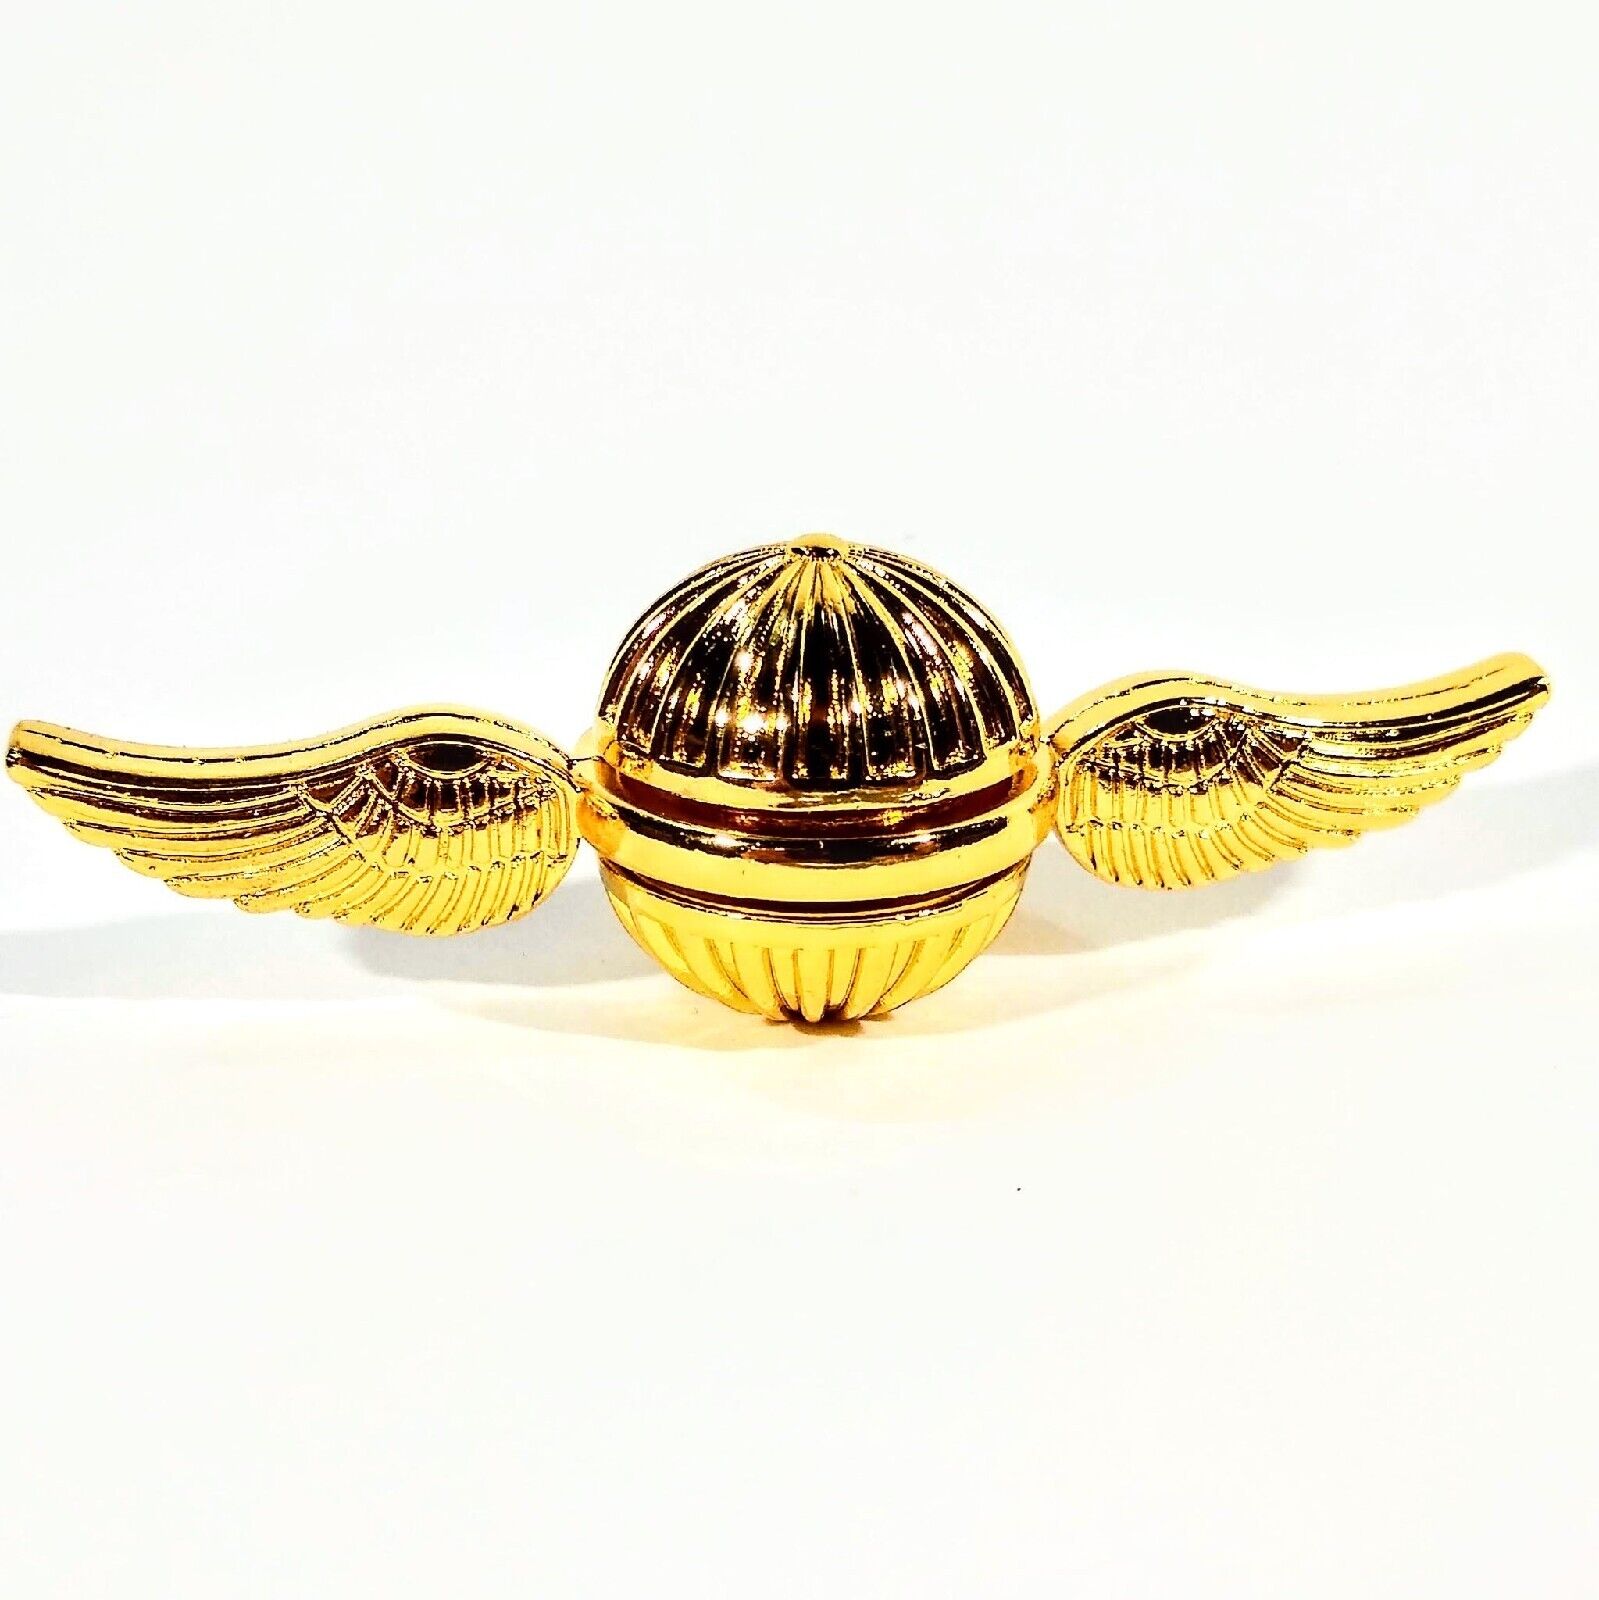 The Golden Snitch Harry Potter Fidget Spinner Toy